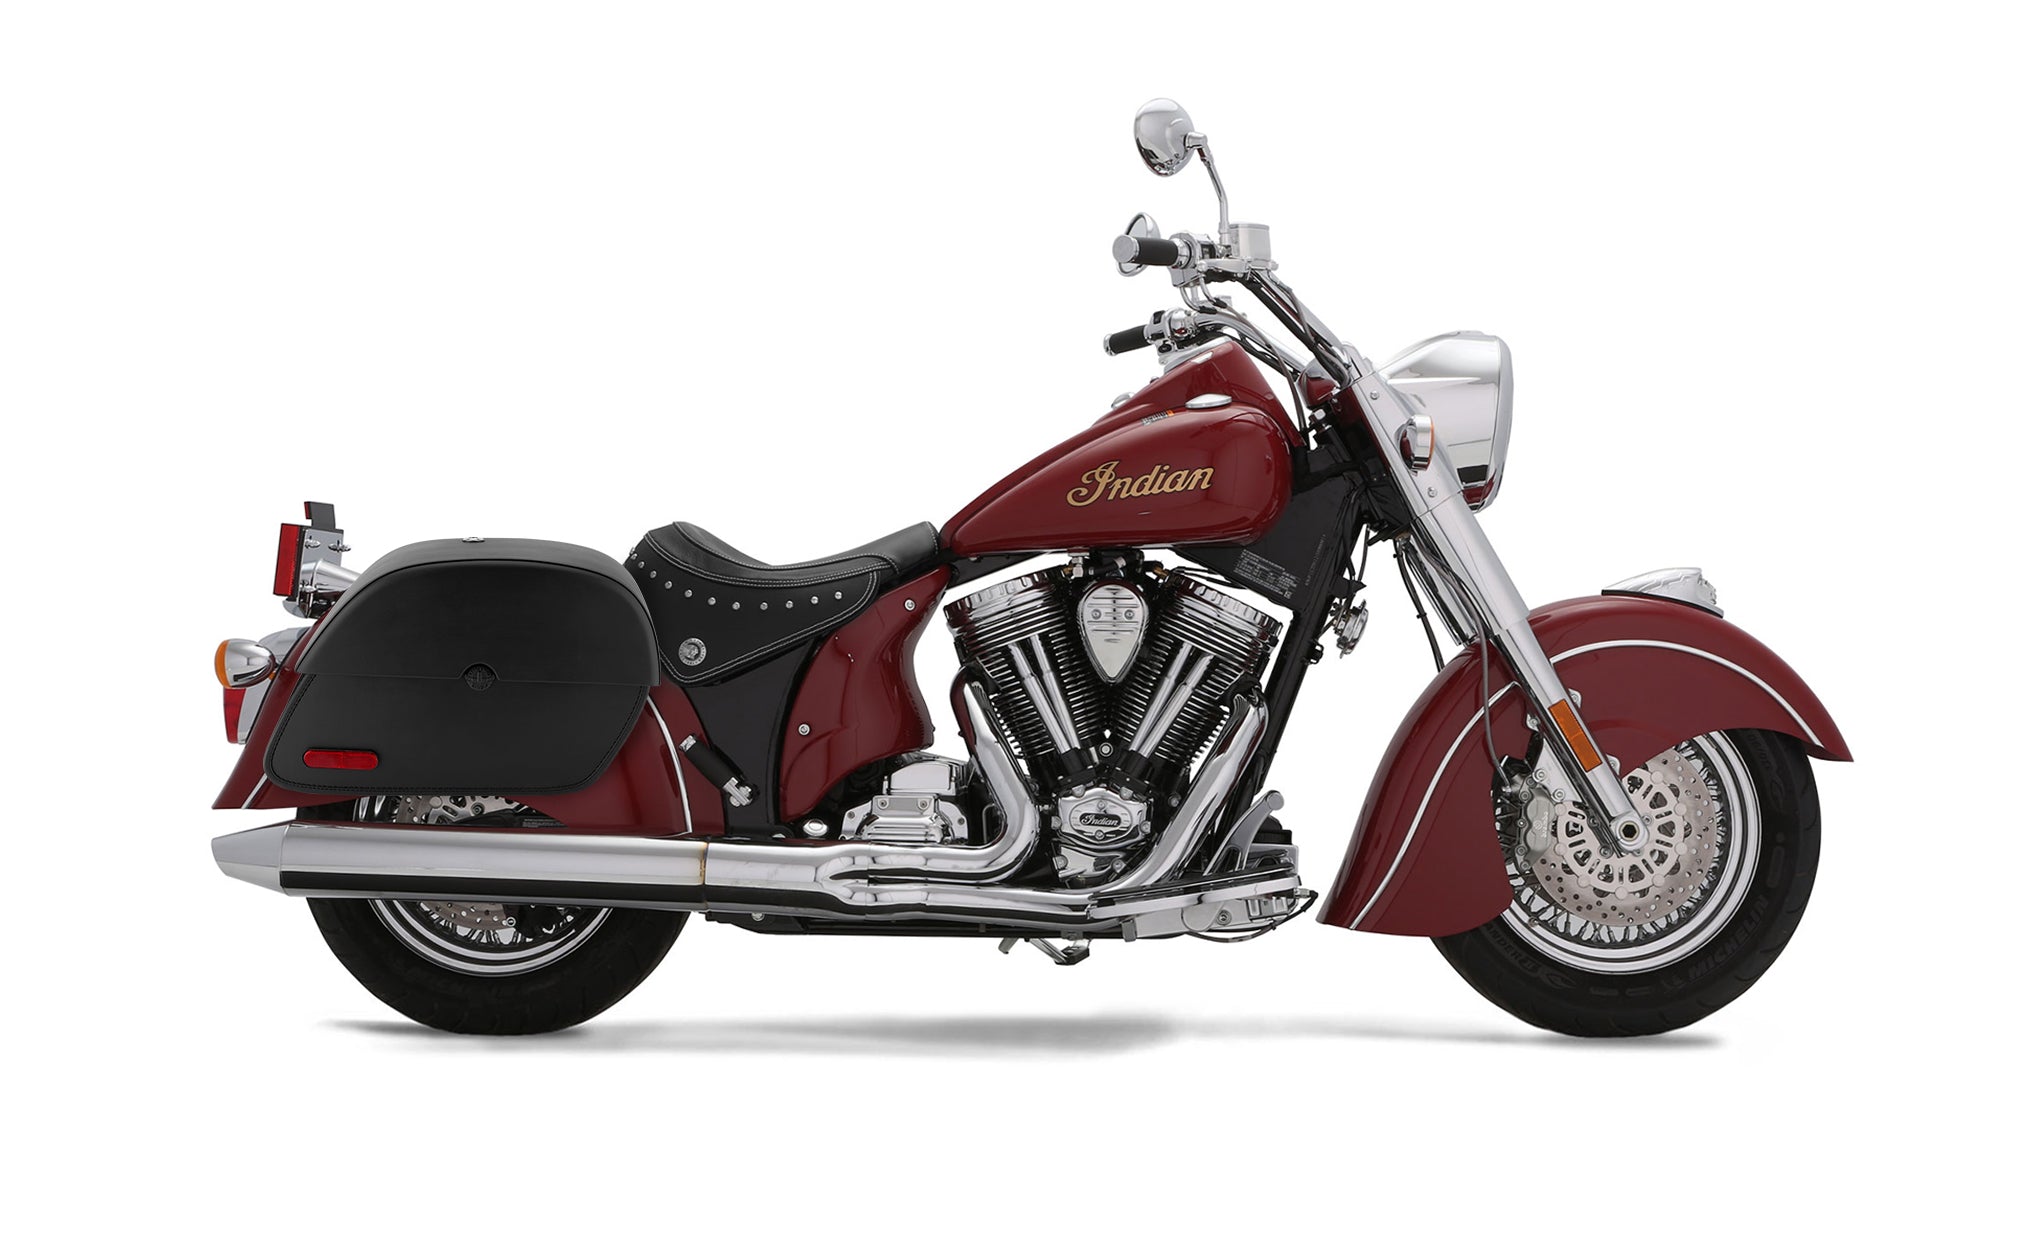 Viking Panzer Large Indian Chief Deluxe Leather Motorcycle Saddlebags on Bike Photo @expand